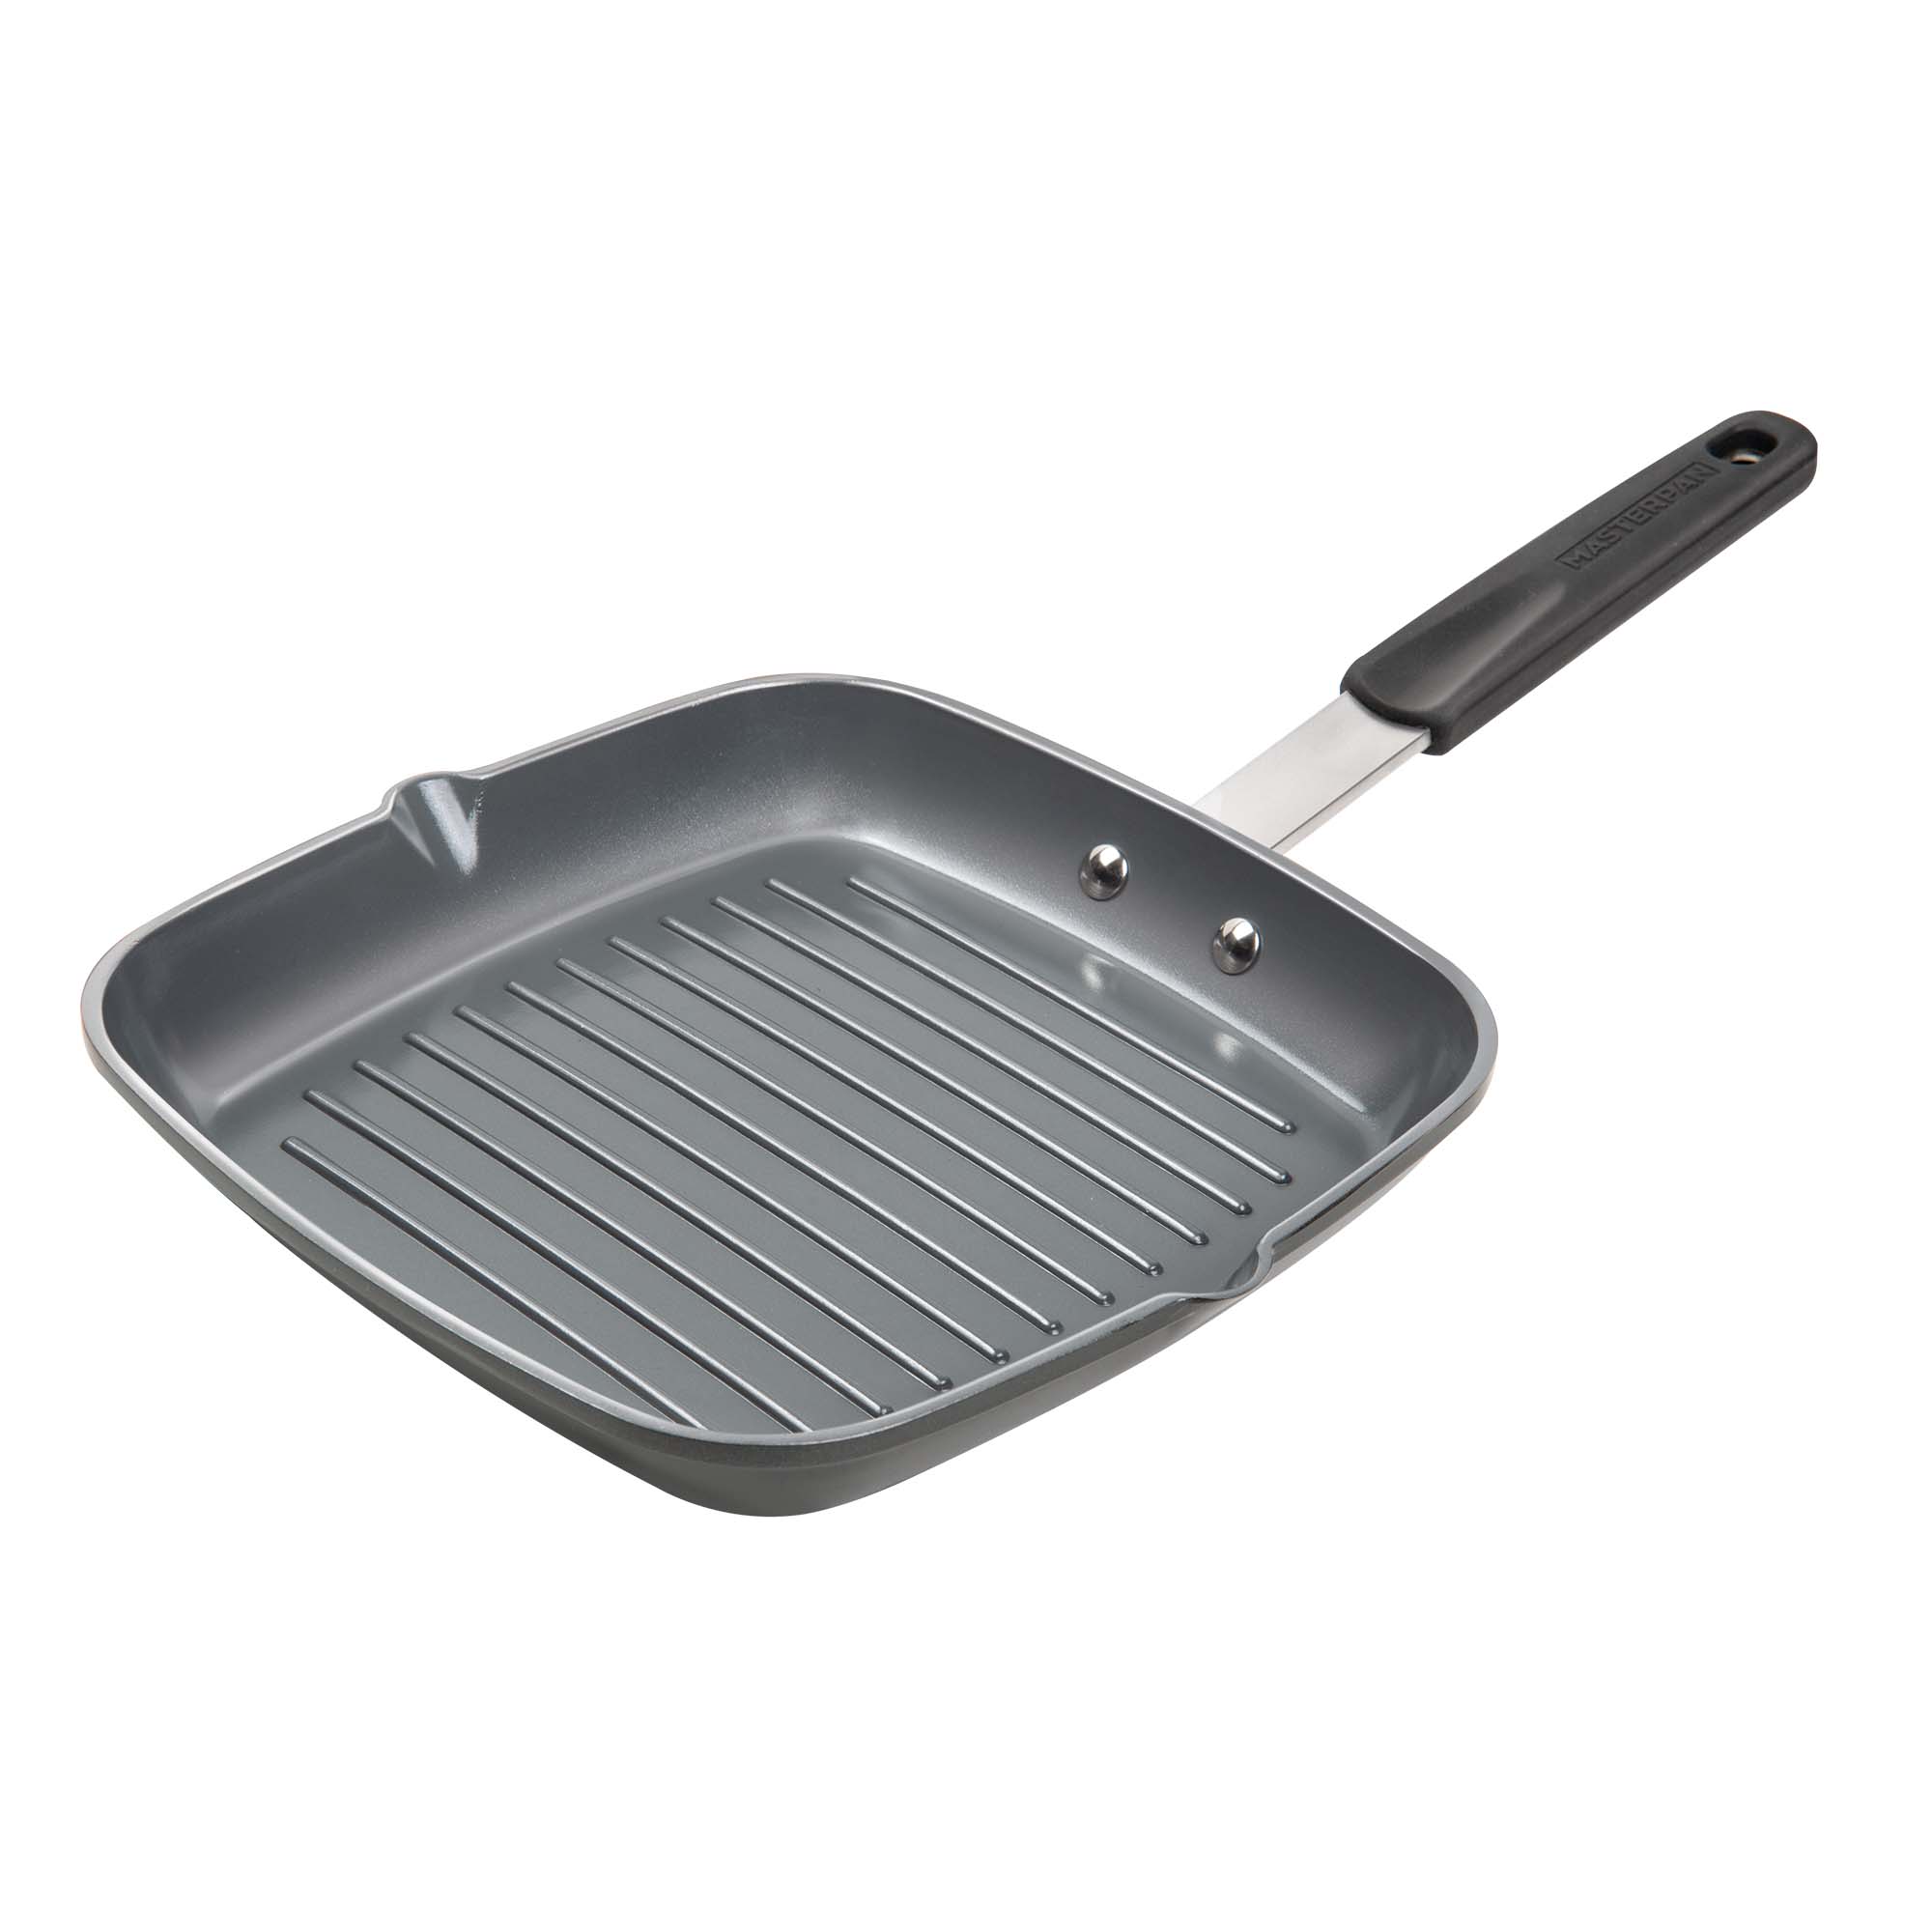 Pampered Chef 12 (30cm) Cast Iron Grill Pan Skillet